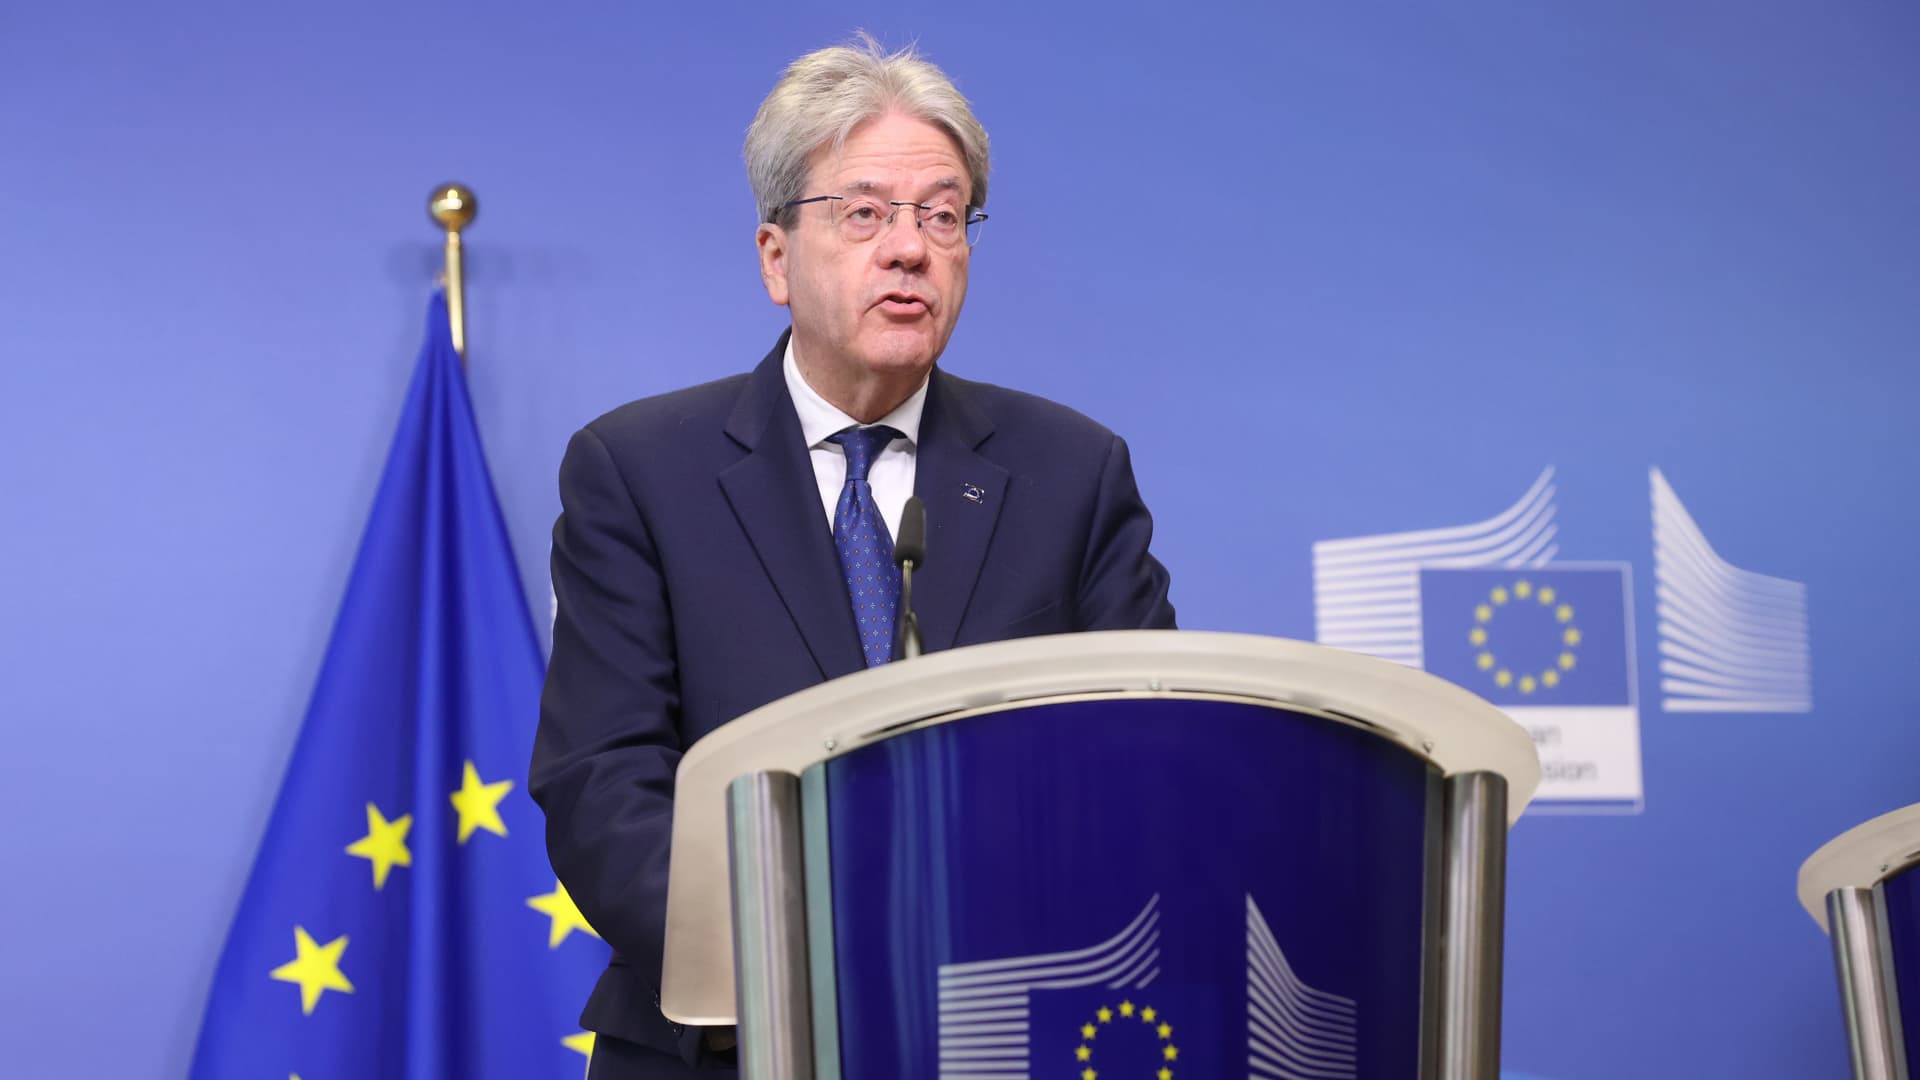 European Commissioner for the Economy Paolo Gentiloni in Brussels, Belgium on March 31, 2022.